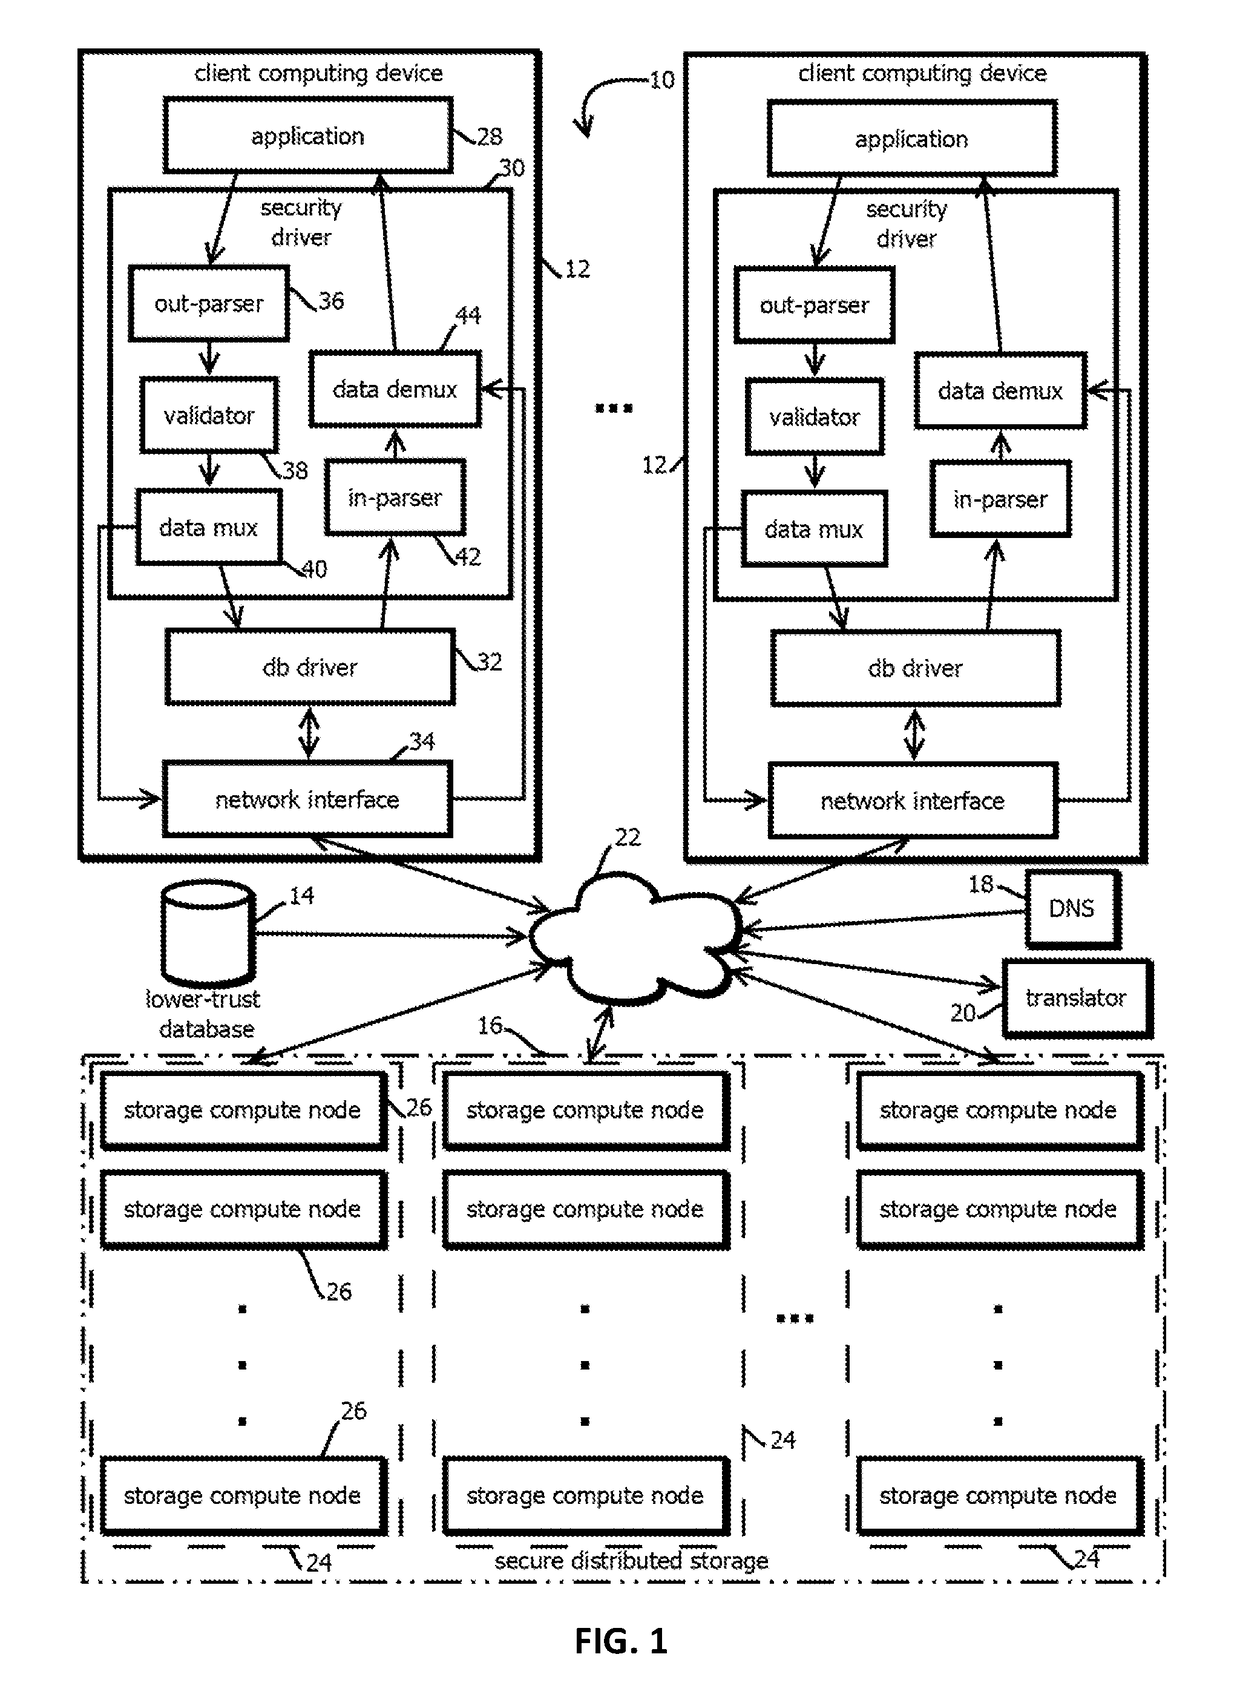 Immutable logging of access requests to distributed file systems